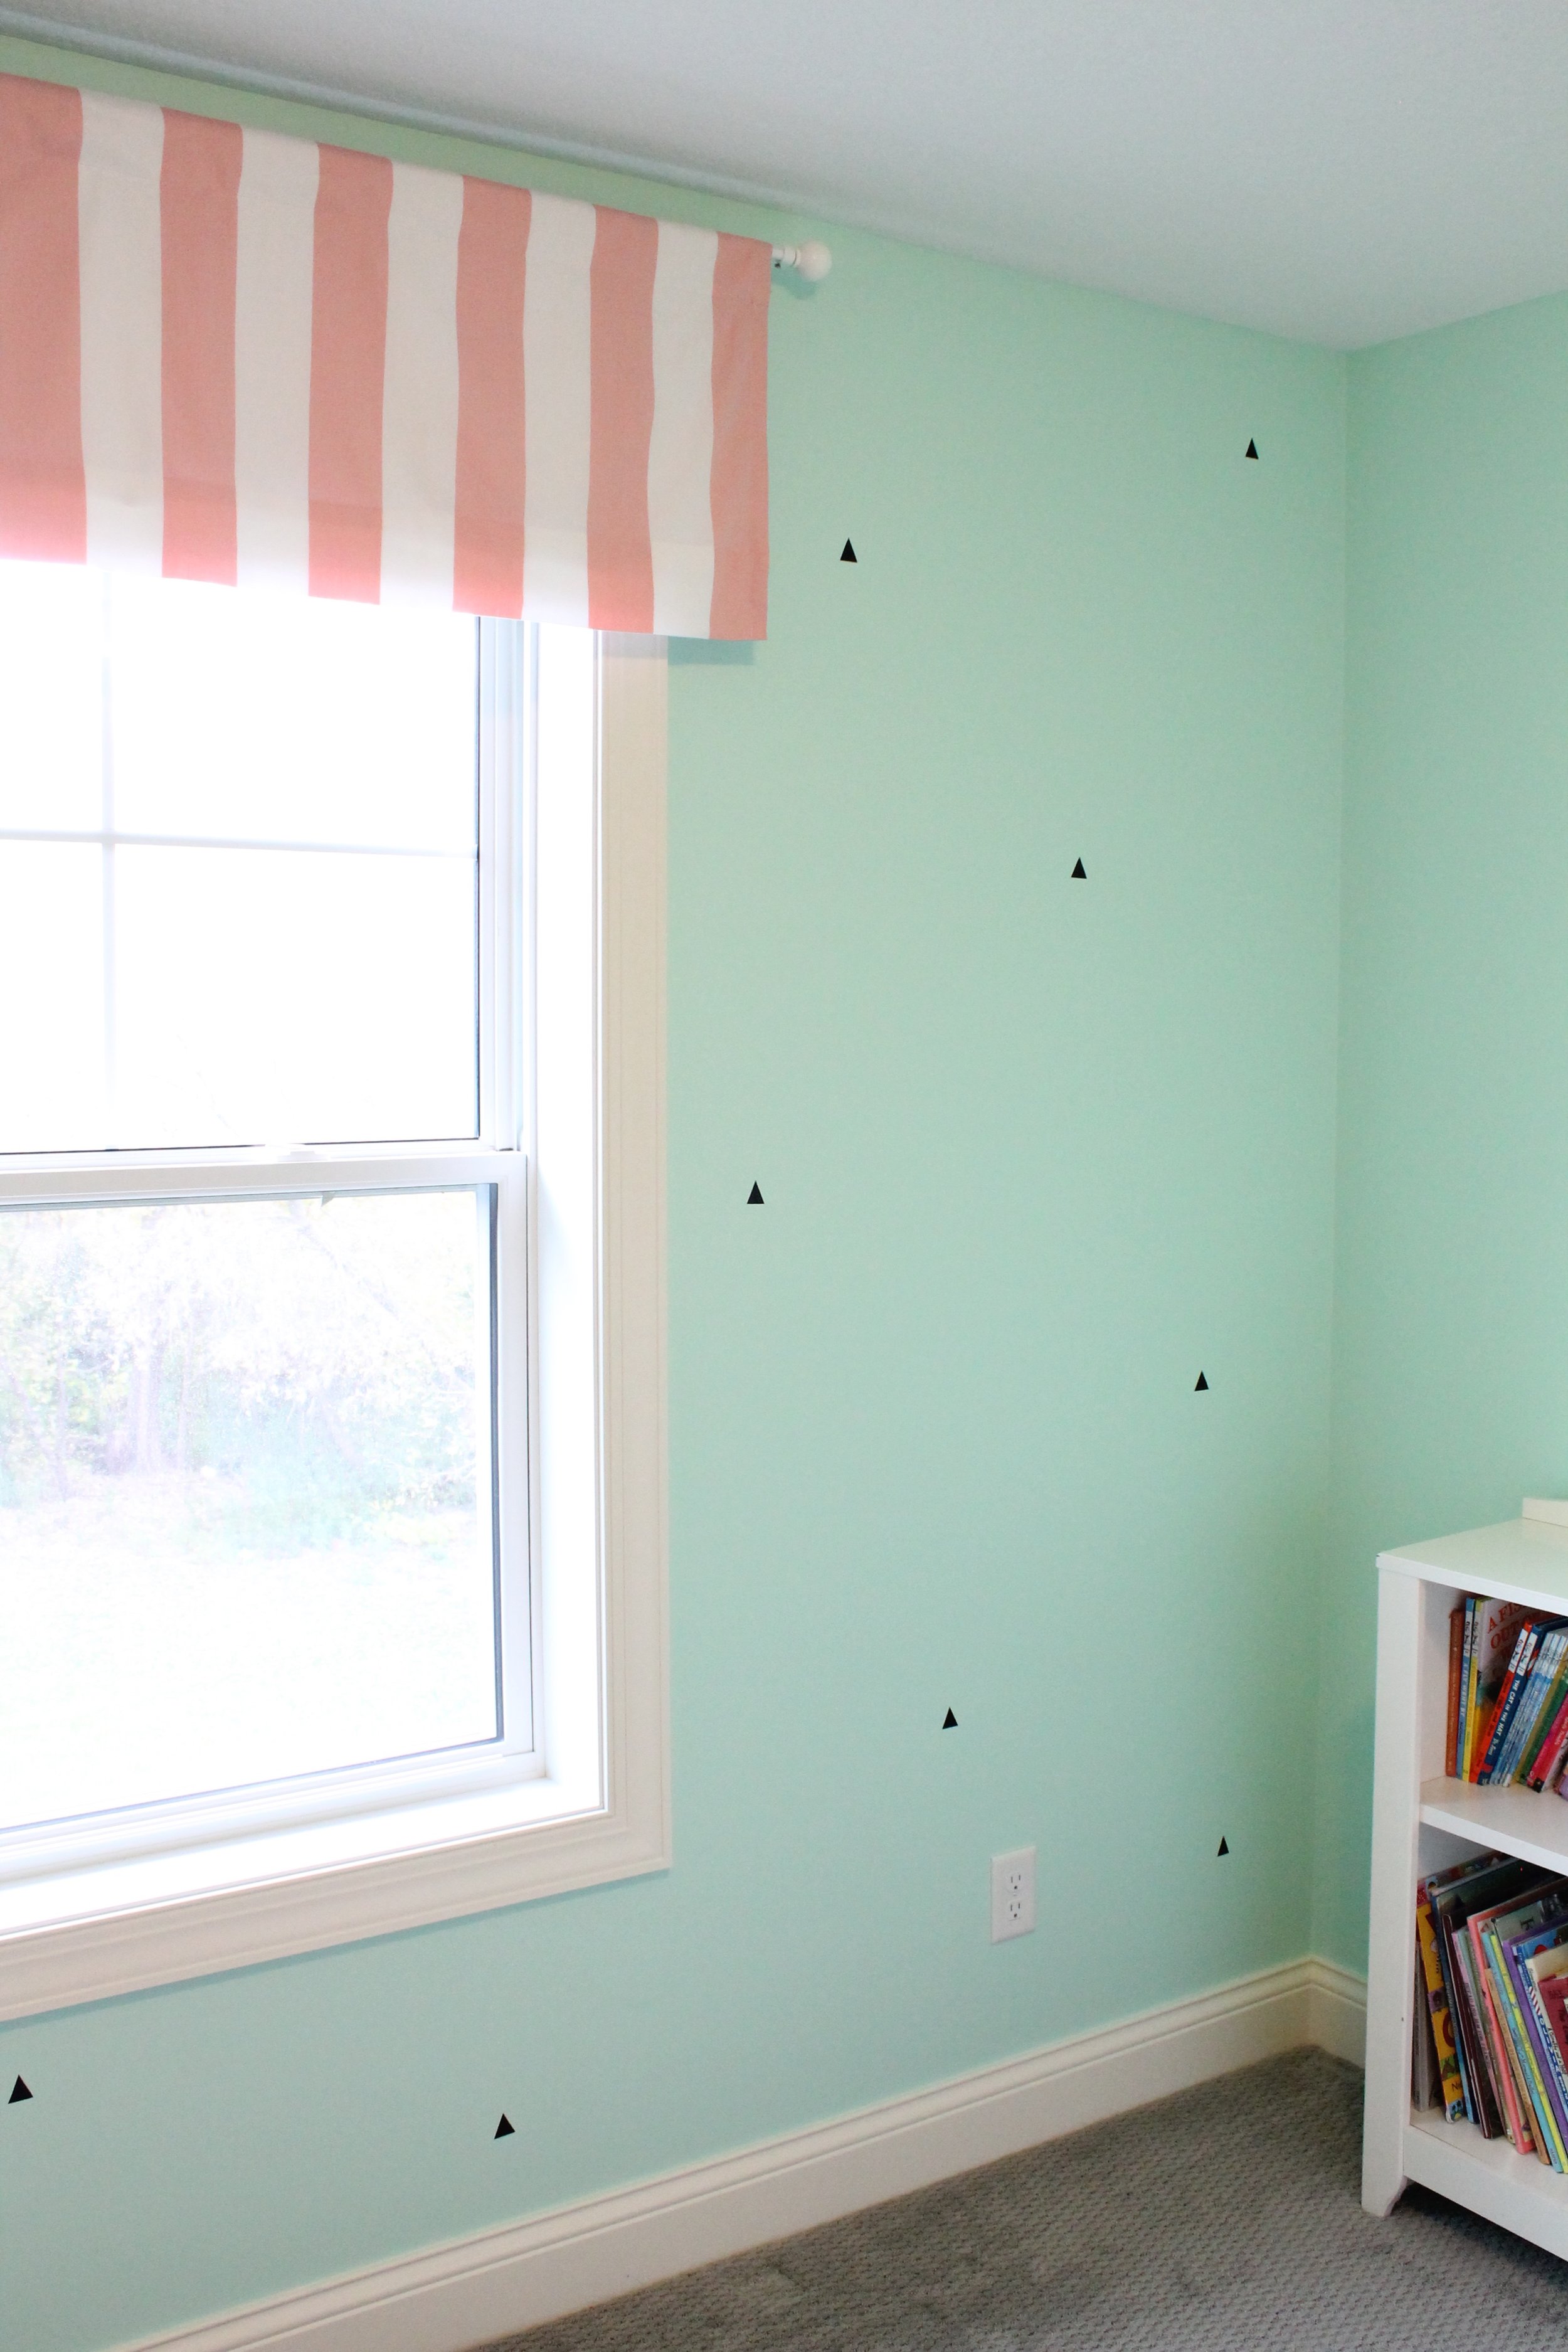 Ice cream inspired bedroom with mint chocolate chip walls.